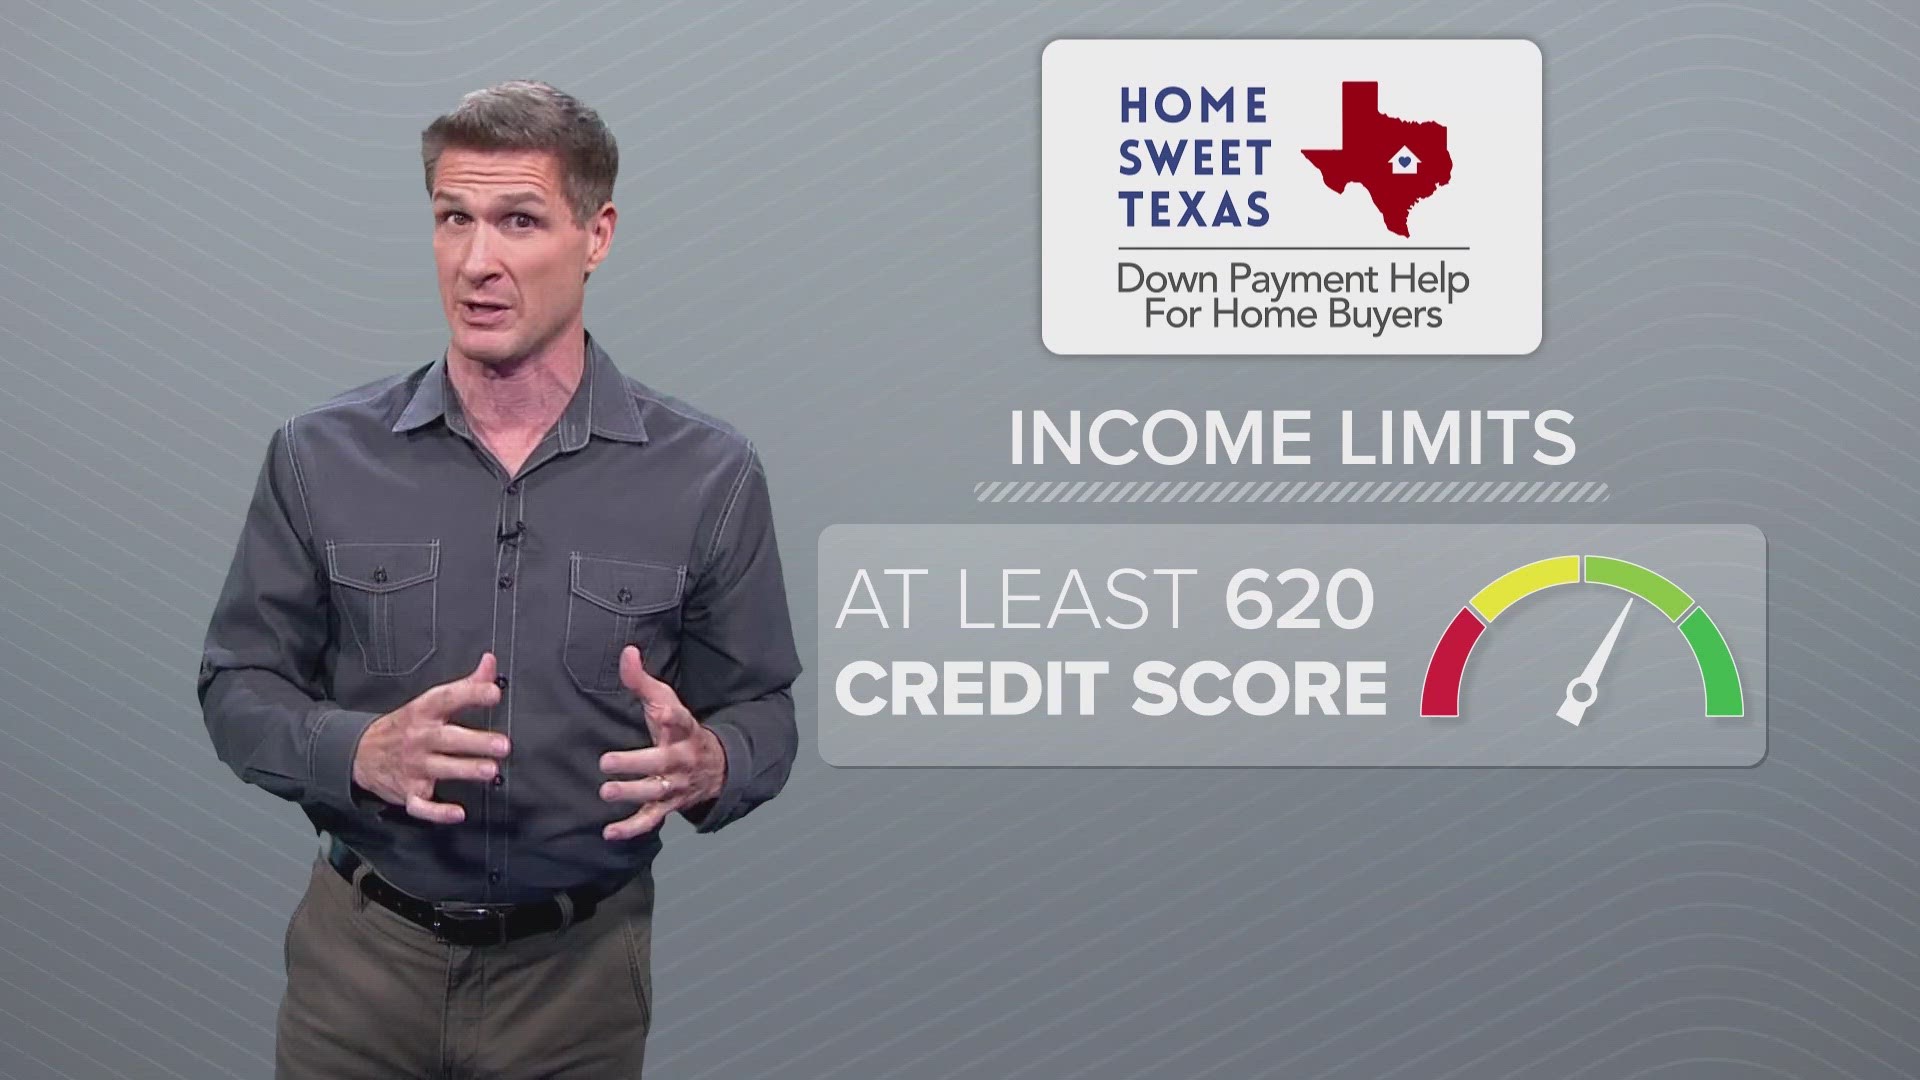 Texas has options for some homebuyers who are struggling to afford a house.